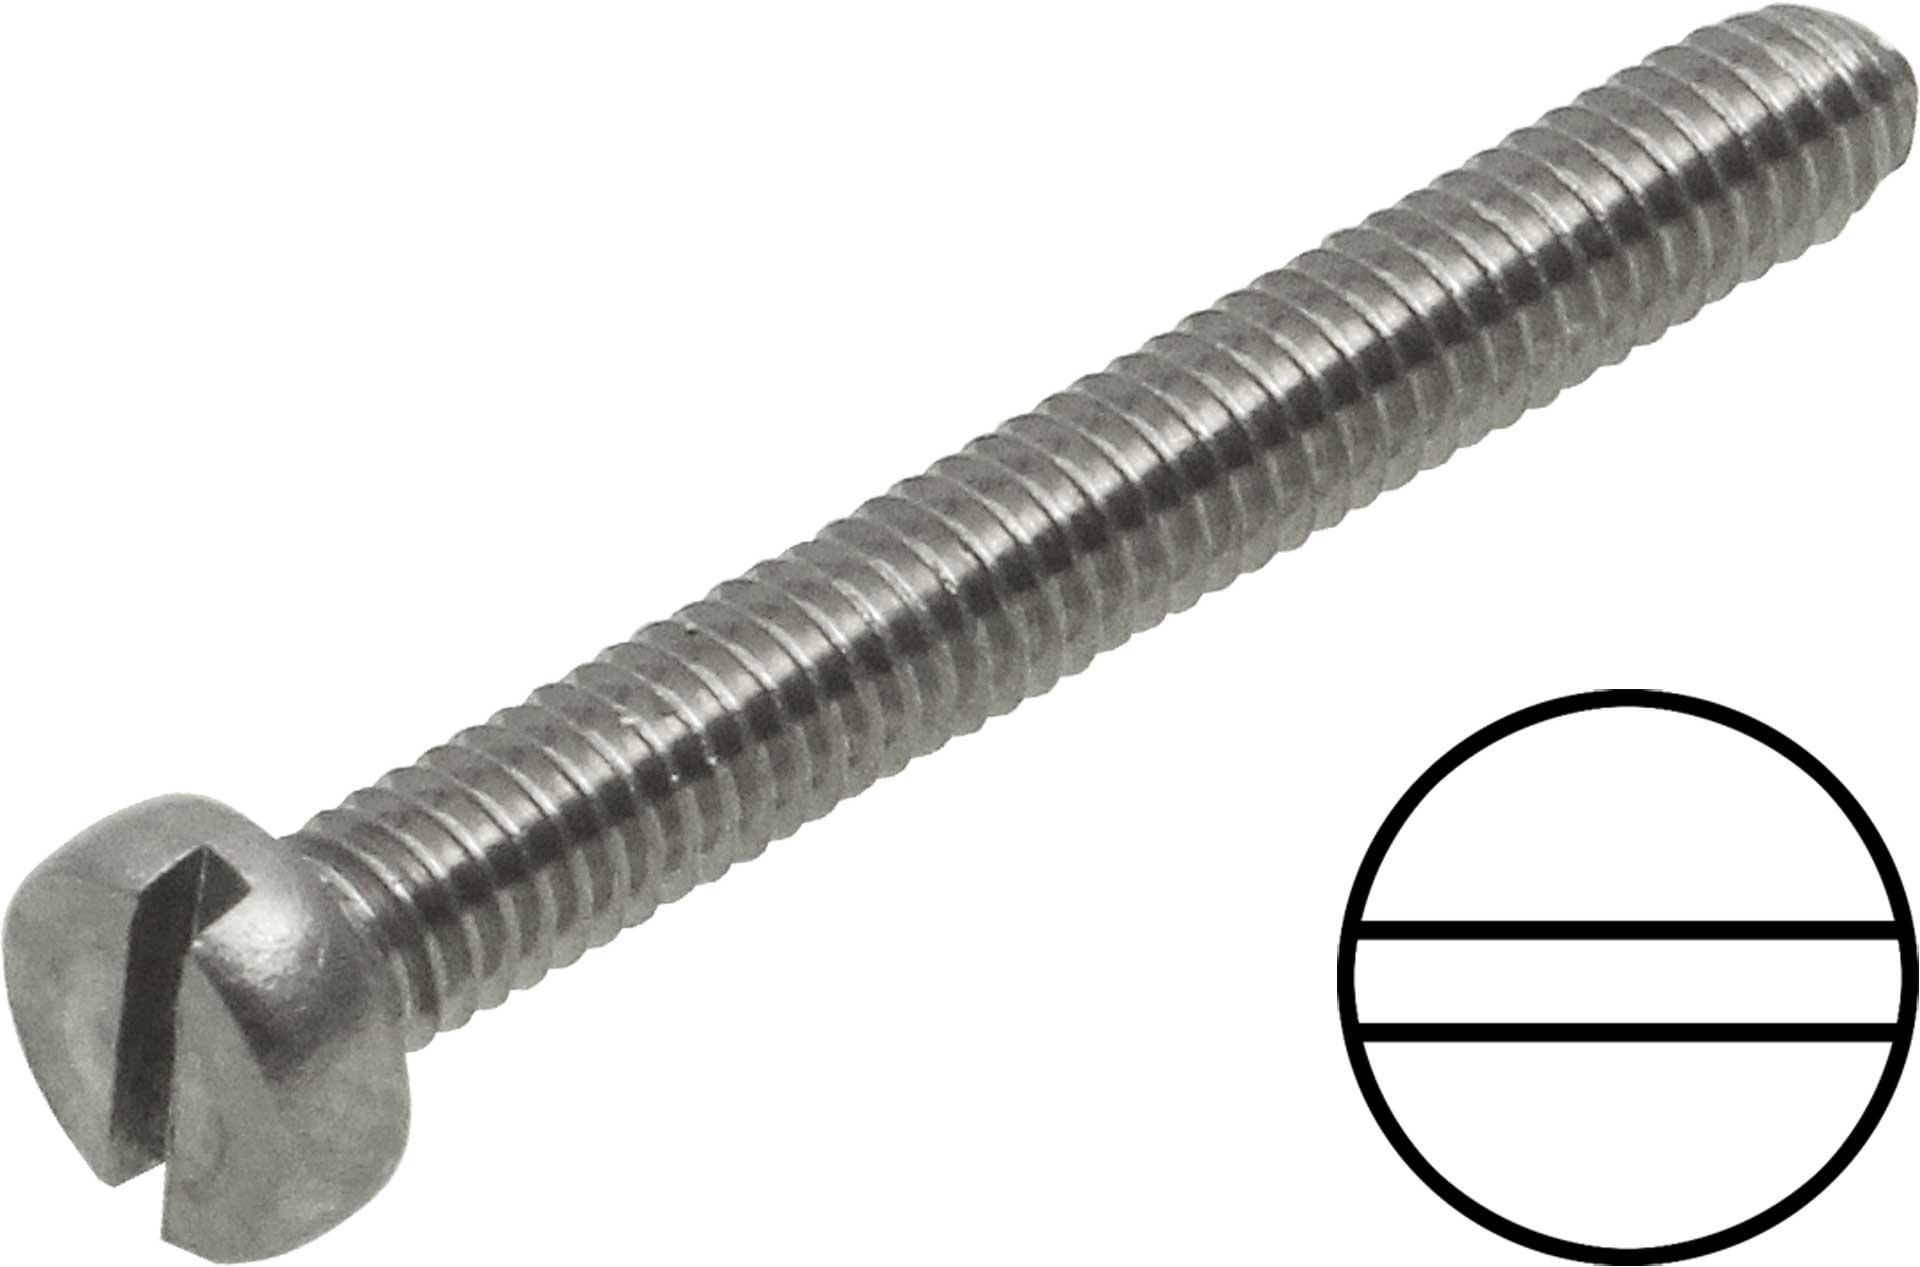 Modellbau Lindinger Cylinder head bolts M2/4mm slotted Stainless steel, rustproof 20pcs.